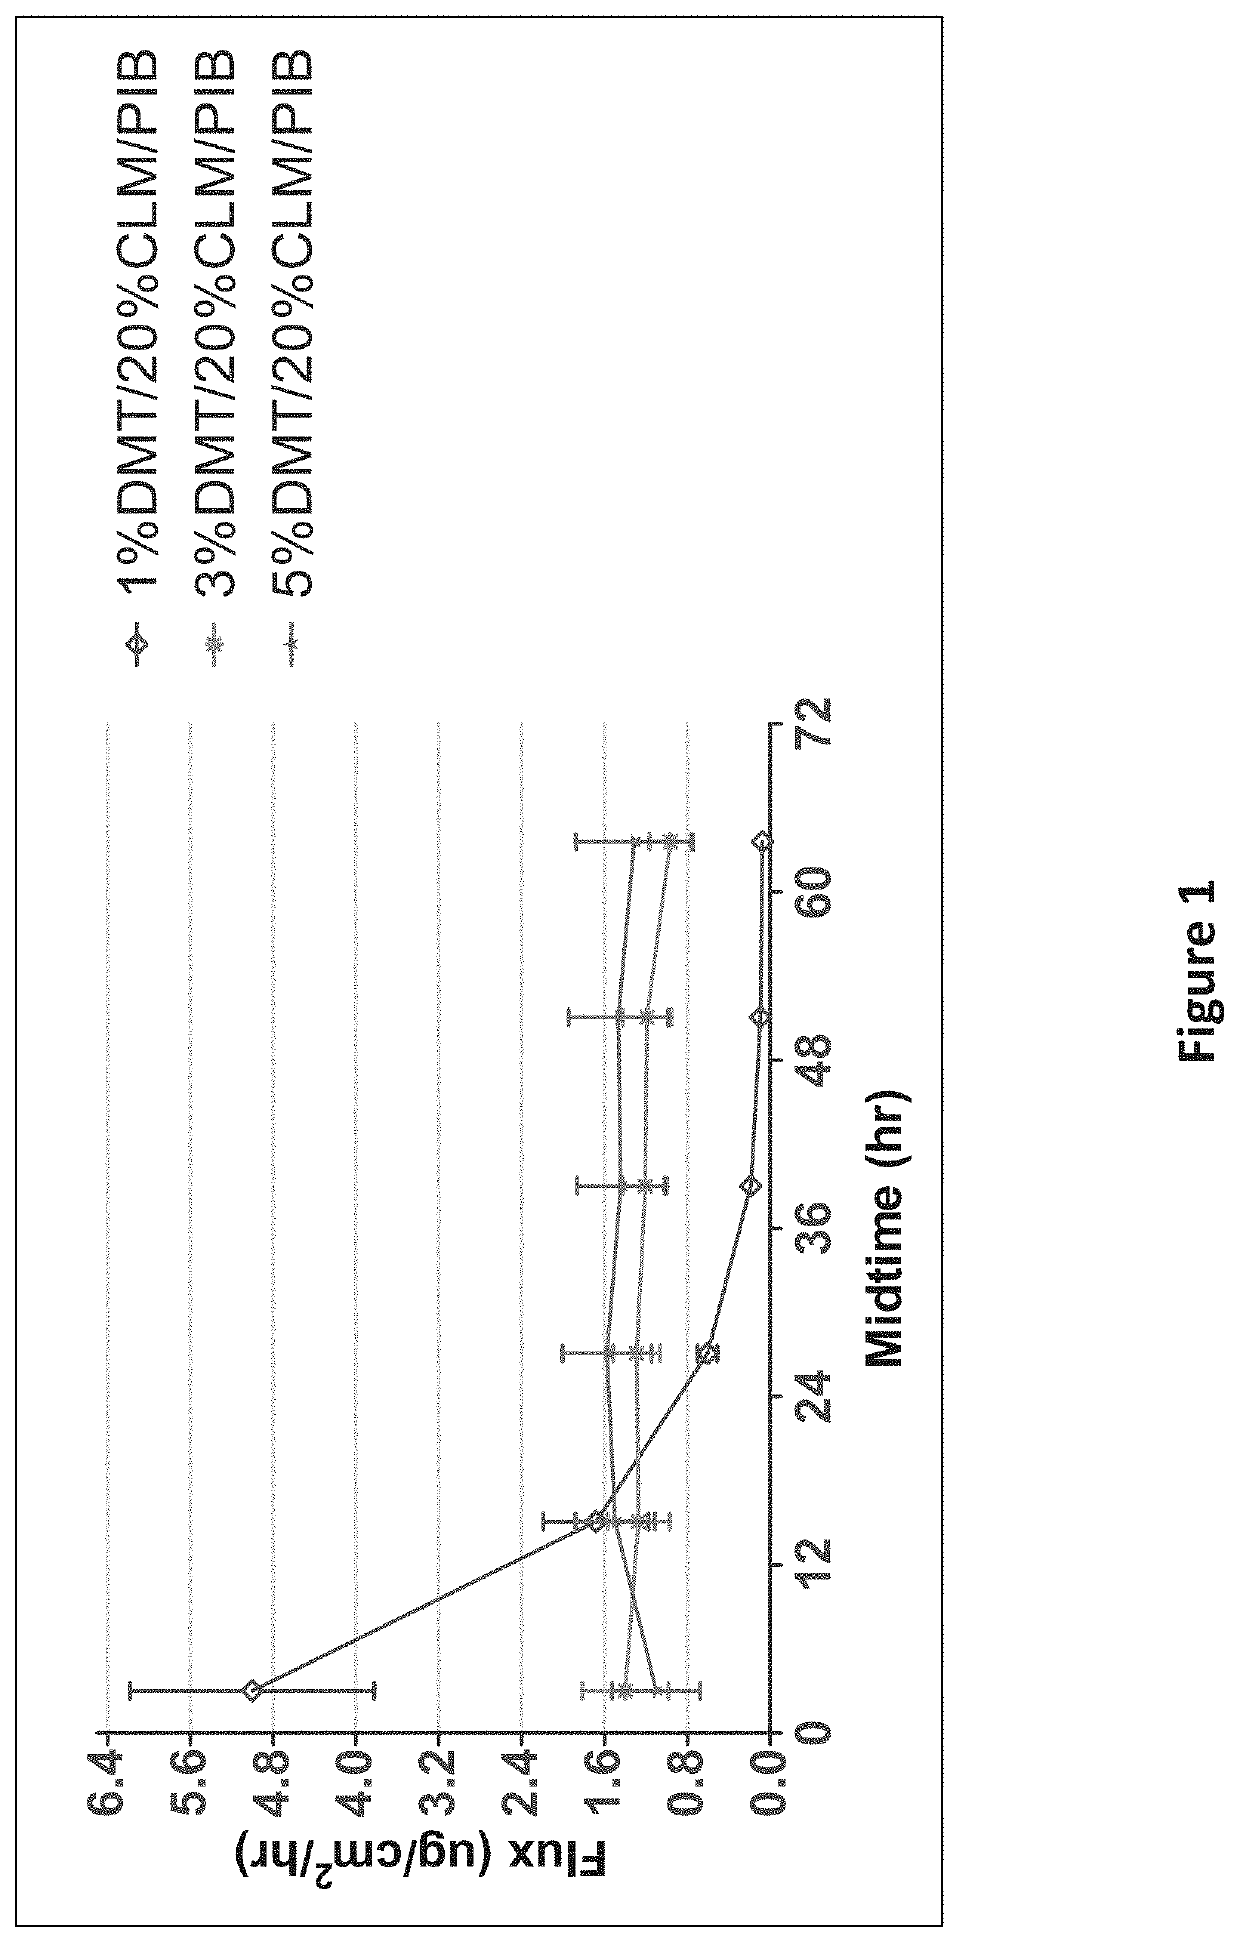 Methods and Compositions for Treating Attention Deficit Hyperactivity Disorder, Anxiety and Insomnia Using Dexmedetomidine Transdermal Compositions